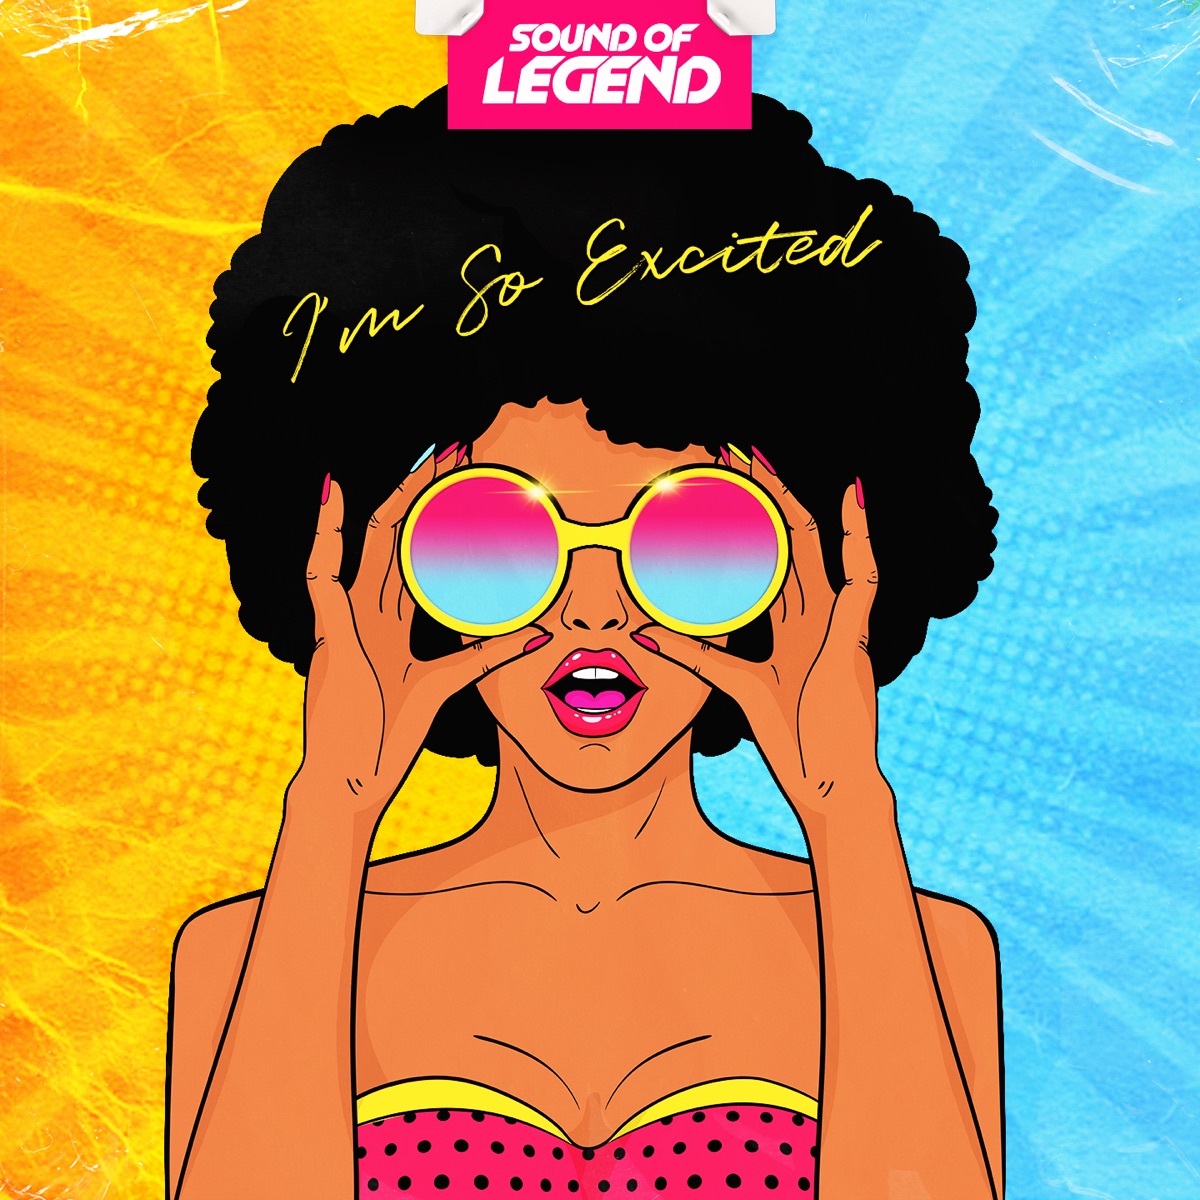 I'm So Excited - Single by Sound Of Legend on Apple Music